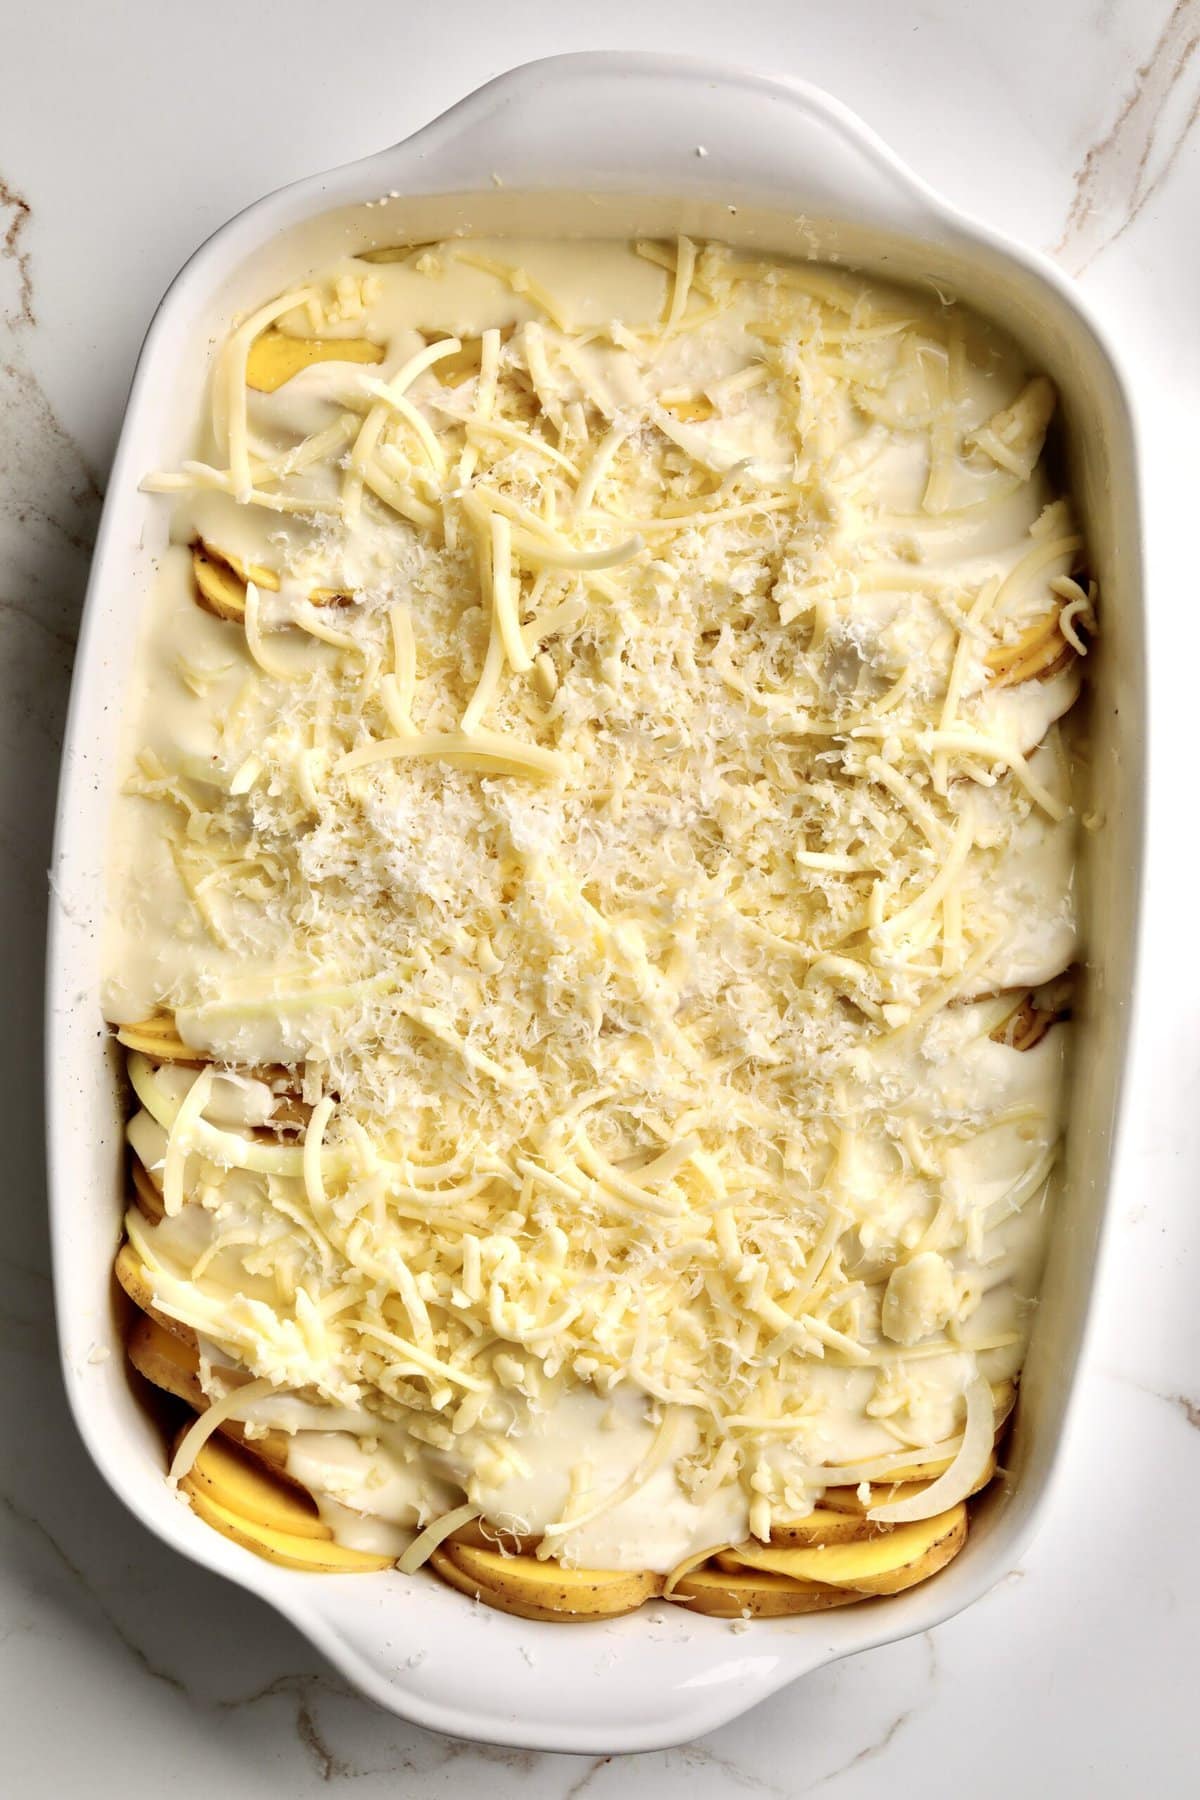 How to make Best Creamy Au Gratin Potatoes Recipe (Dad's Famous)- pour cheese sauce over the potatoes and cover with more cheese.